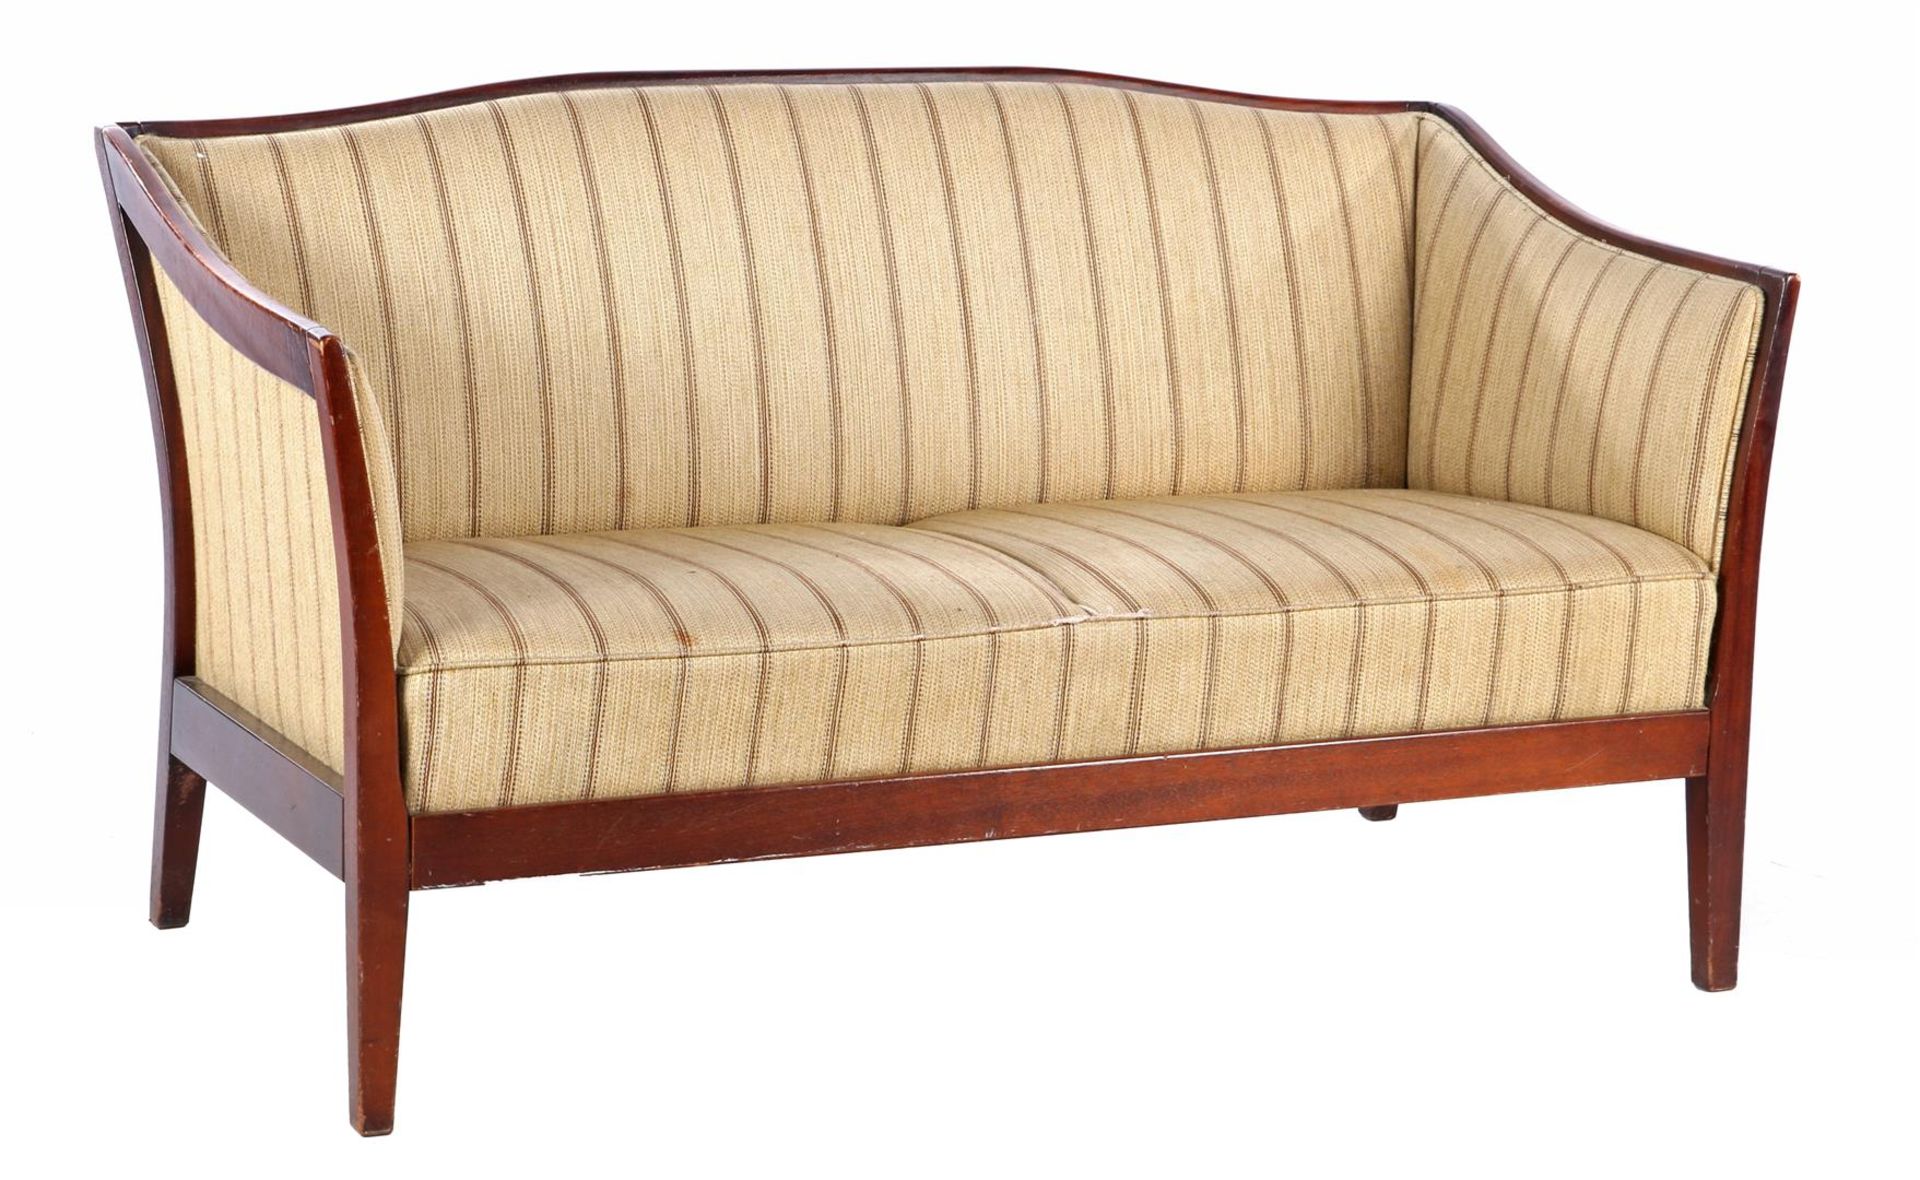 Teak 2-seater sofa with striped upholstery